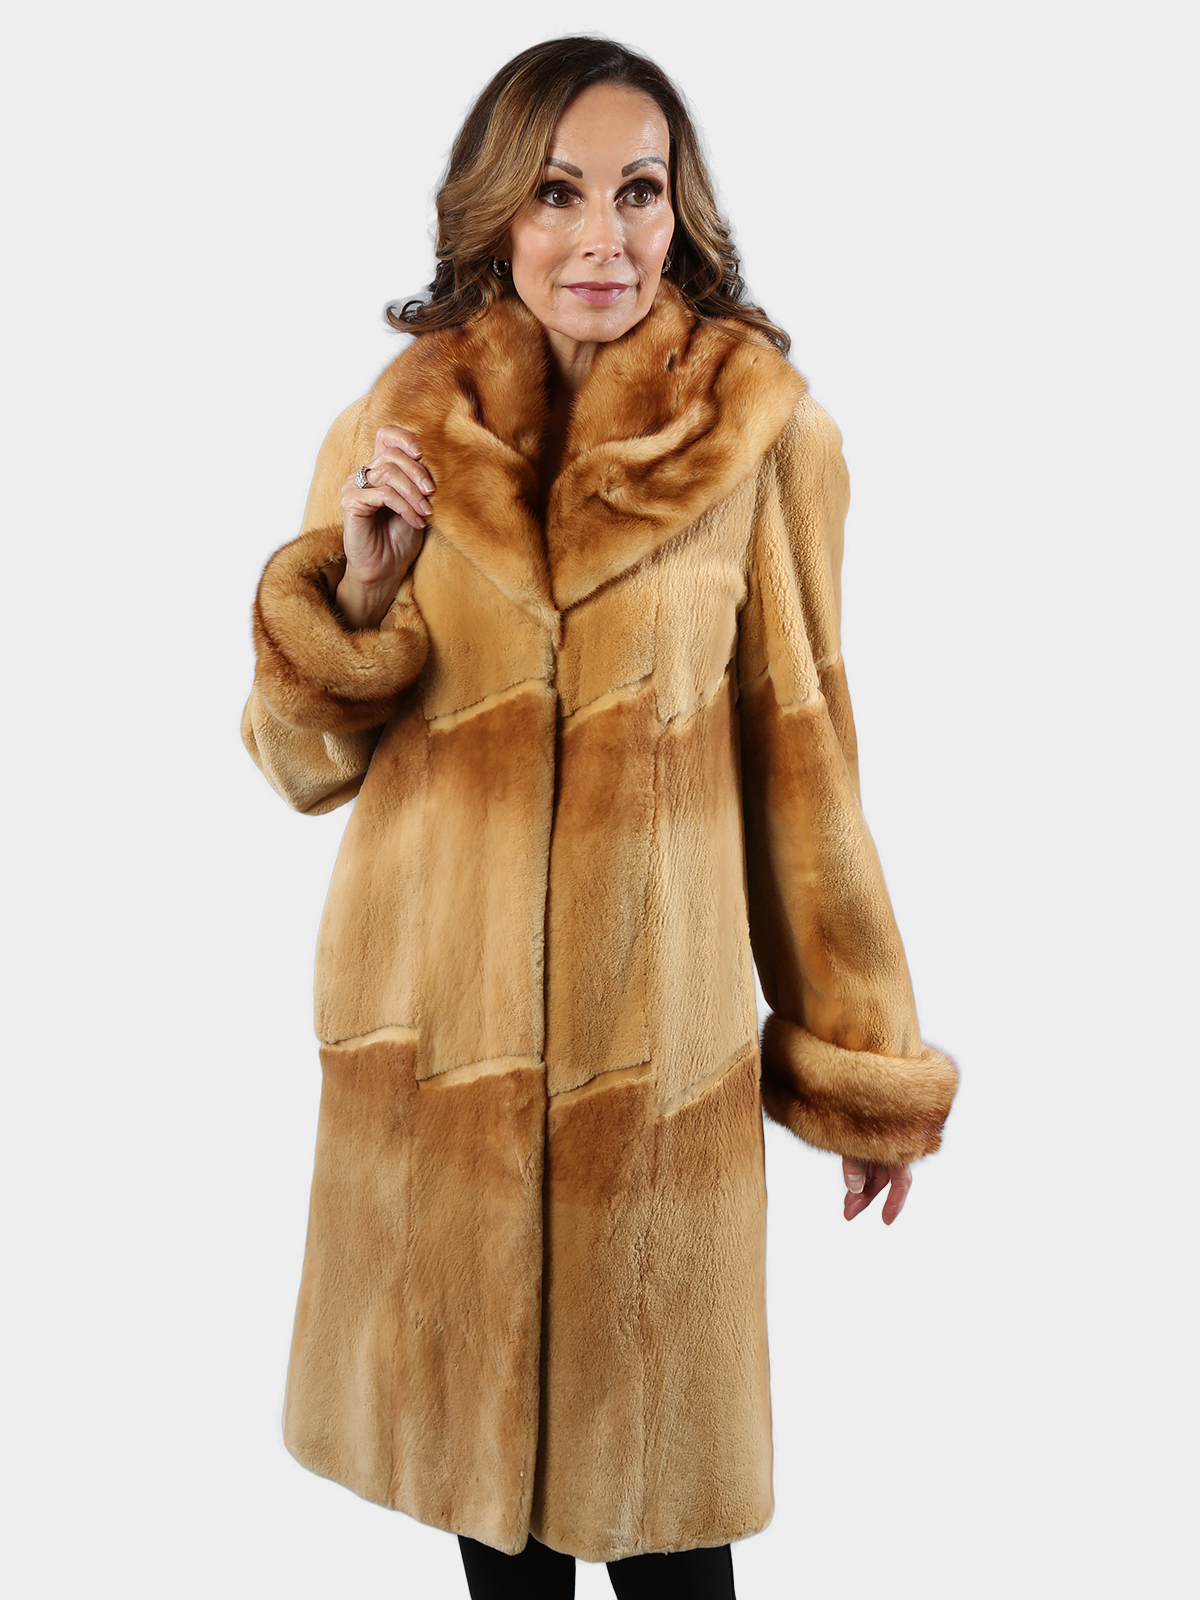 Mink Fur Coat in Brown Color With a Collar 